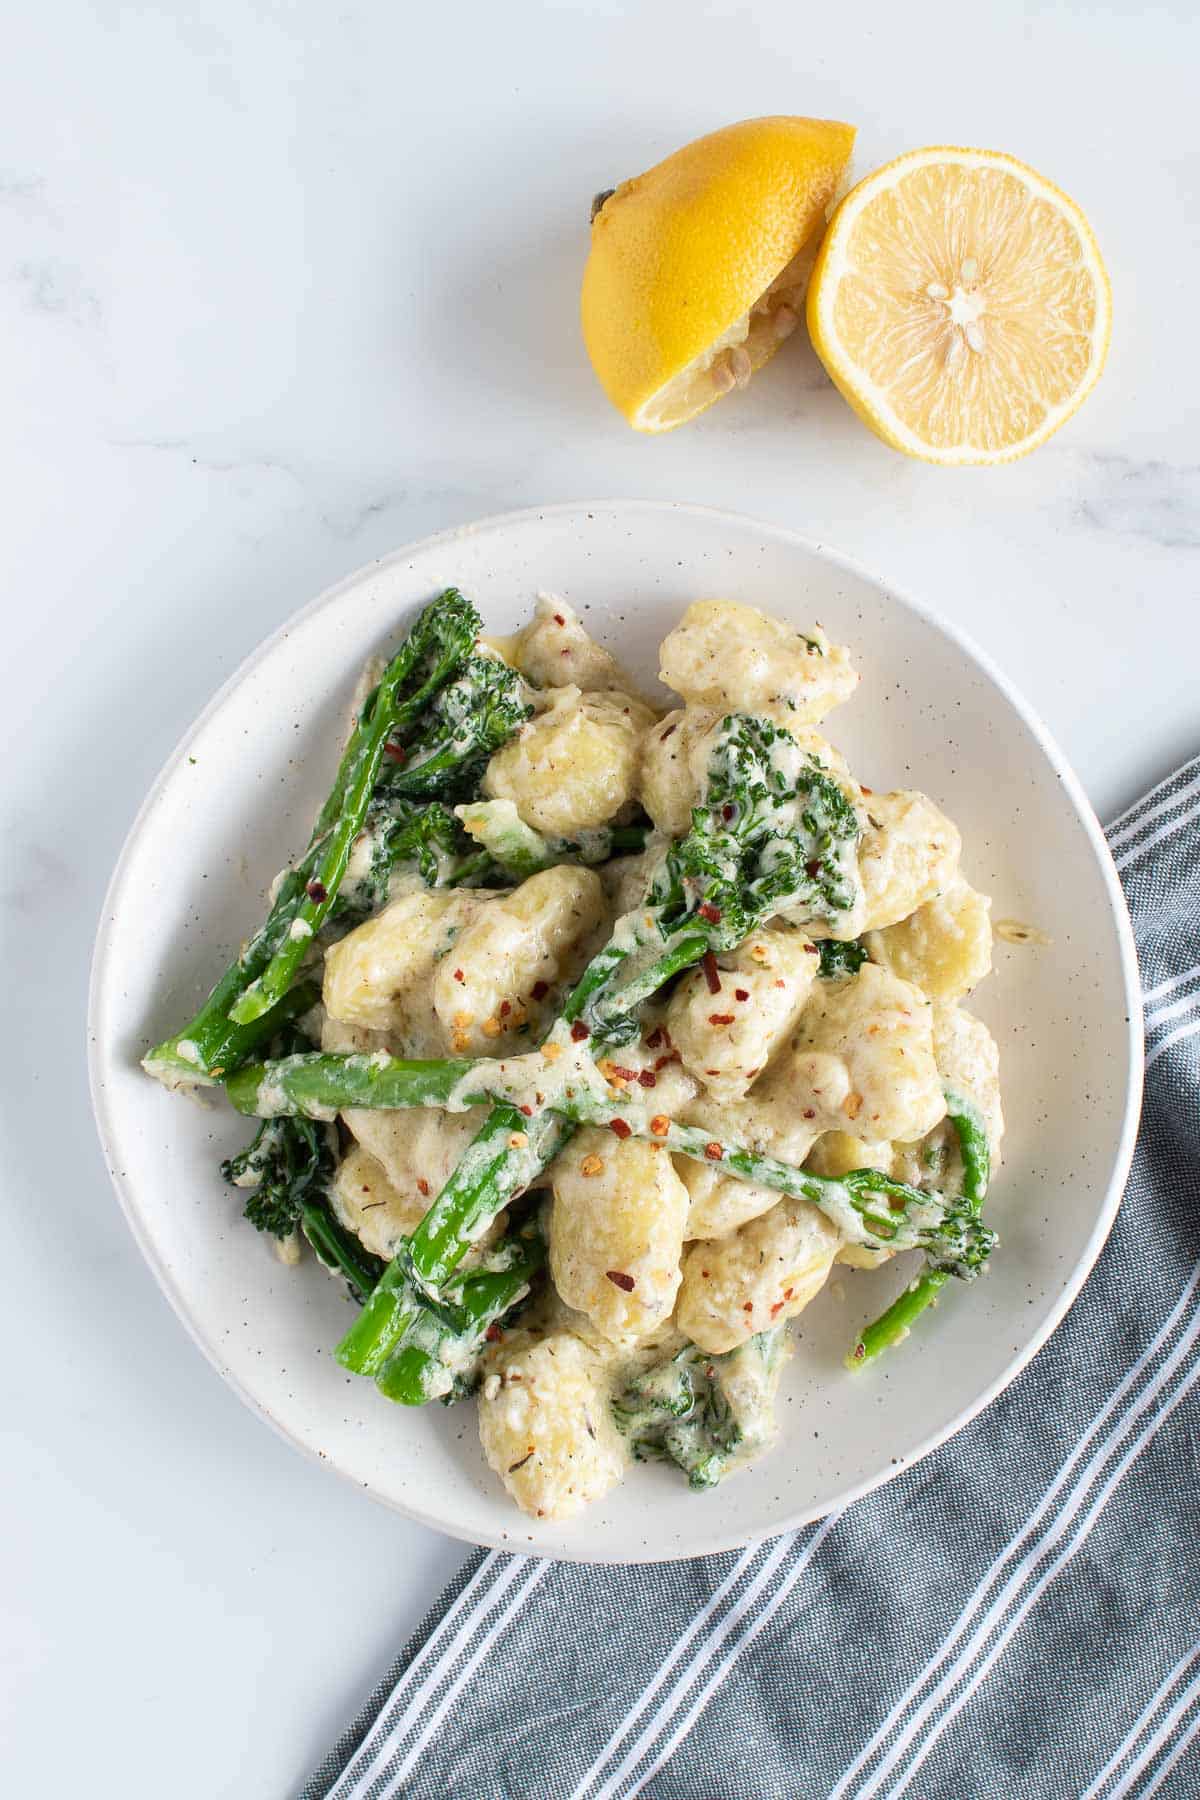 Gnocchi and broccoli on a plate, with lemon on the side.